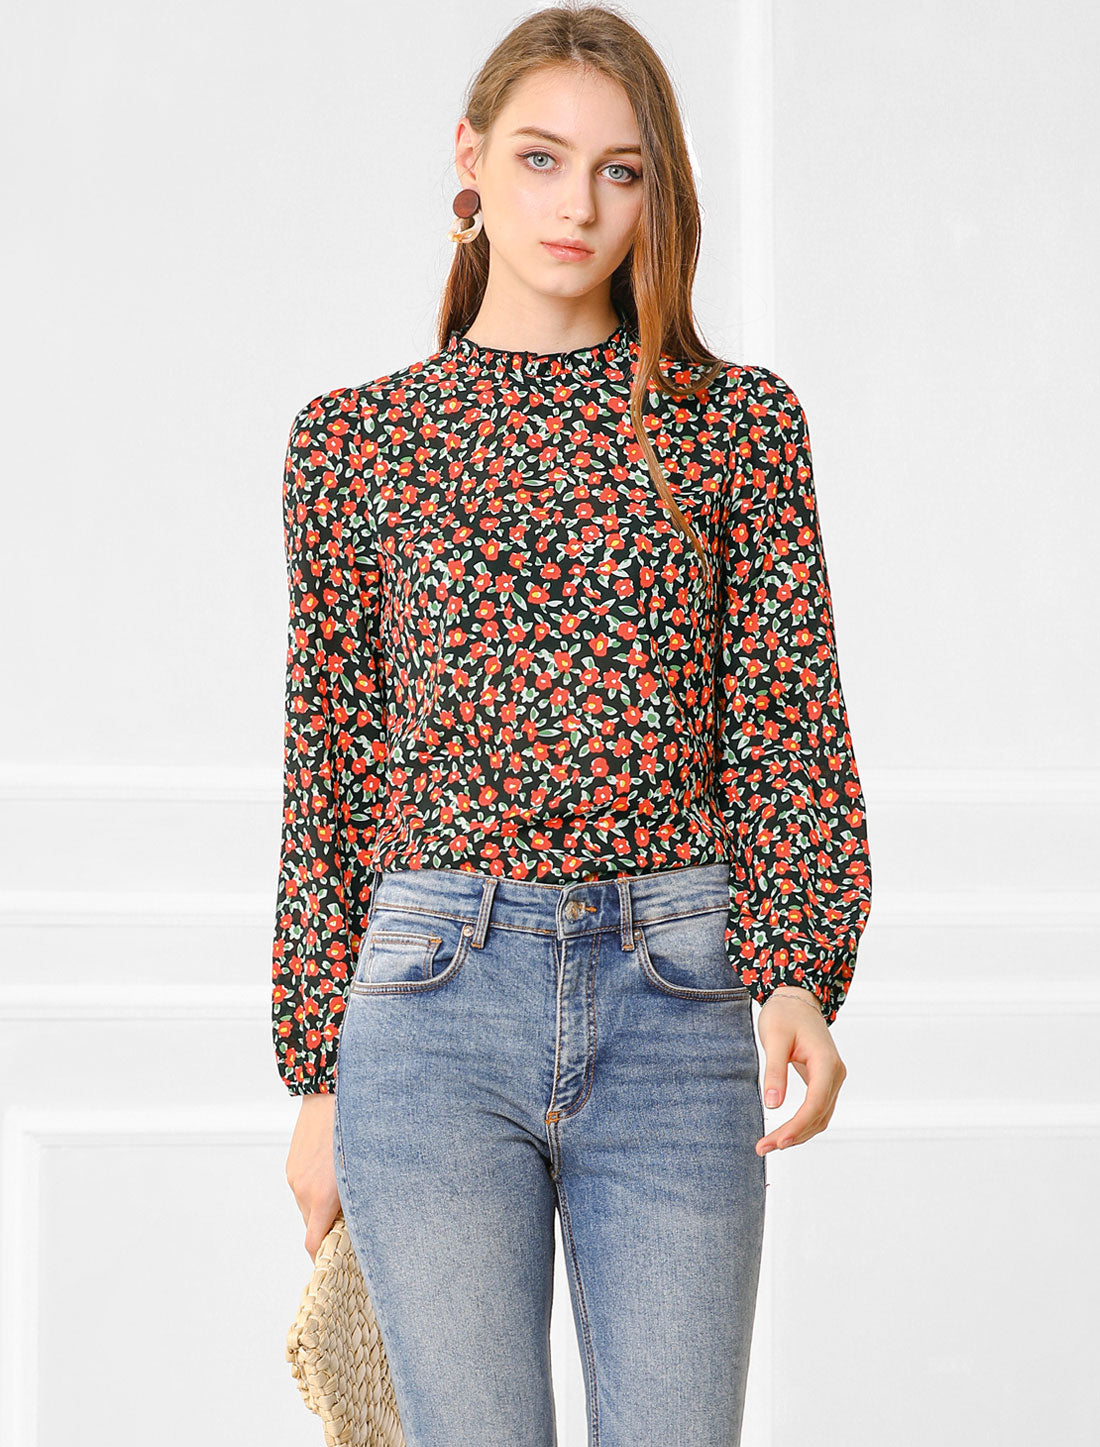 Allegra K Casual Stand Collared Blouse Long Sleeve Floral Tops